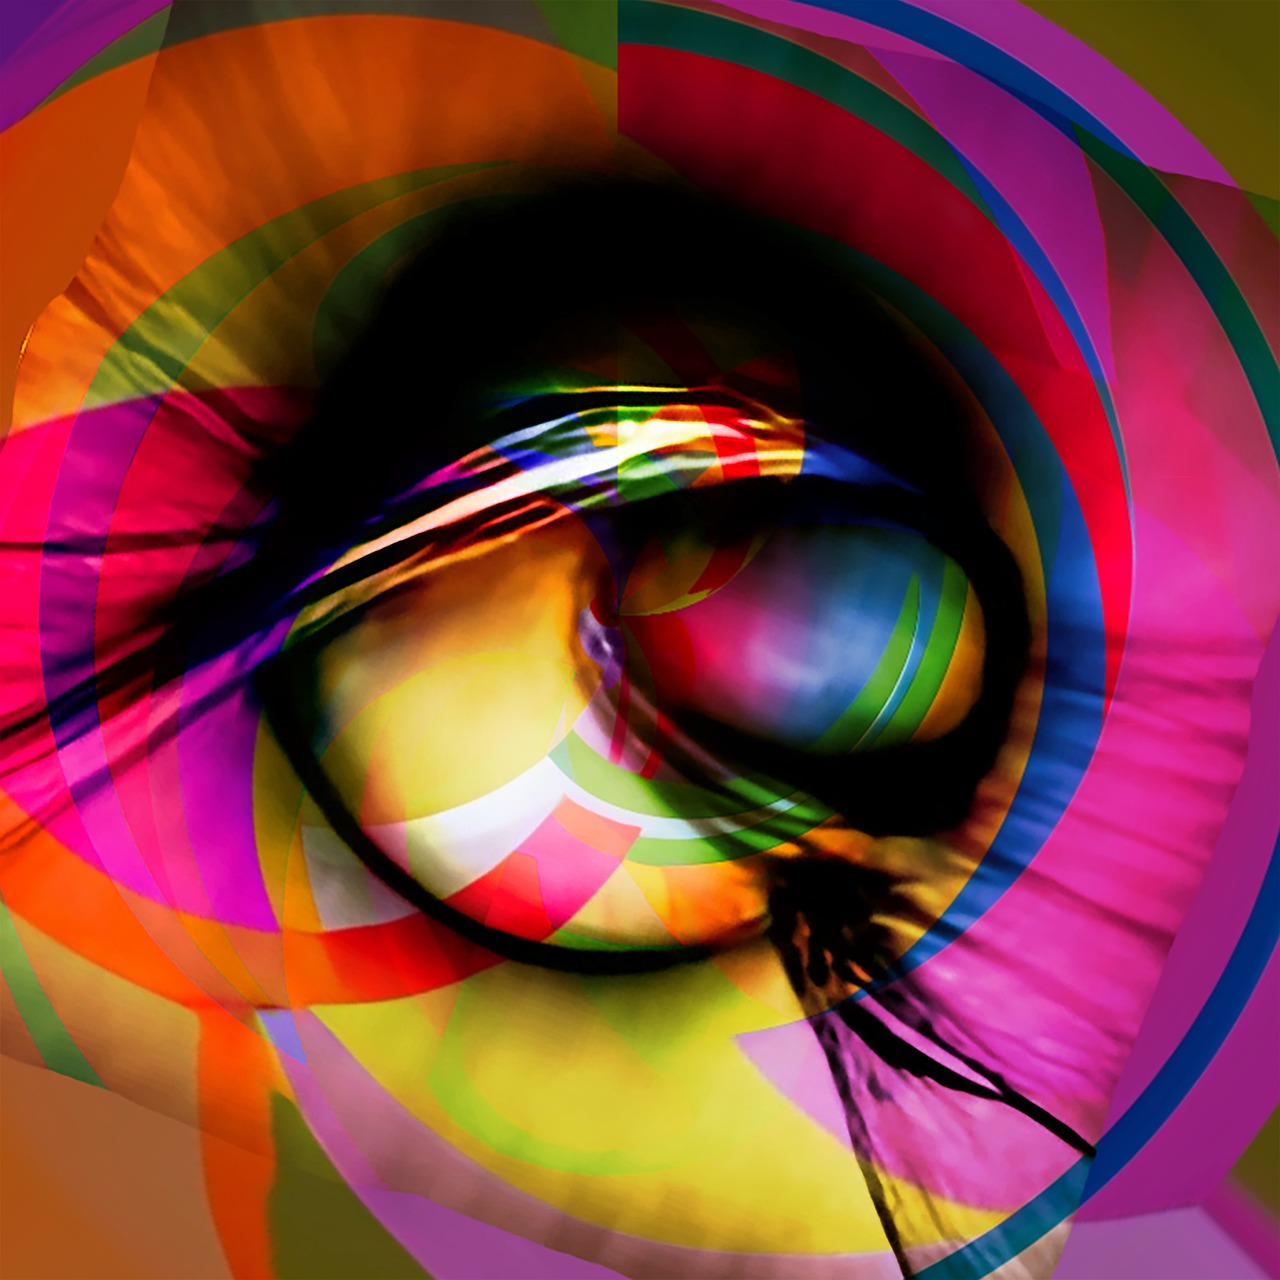 An eye with blocks of colors meant to represent migraines and auras.